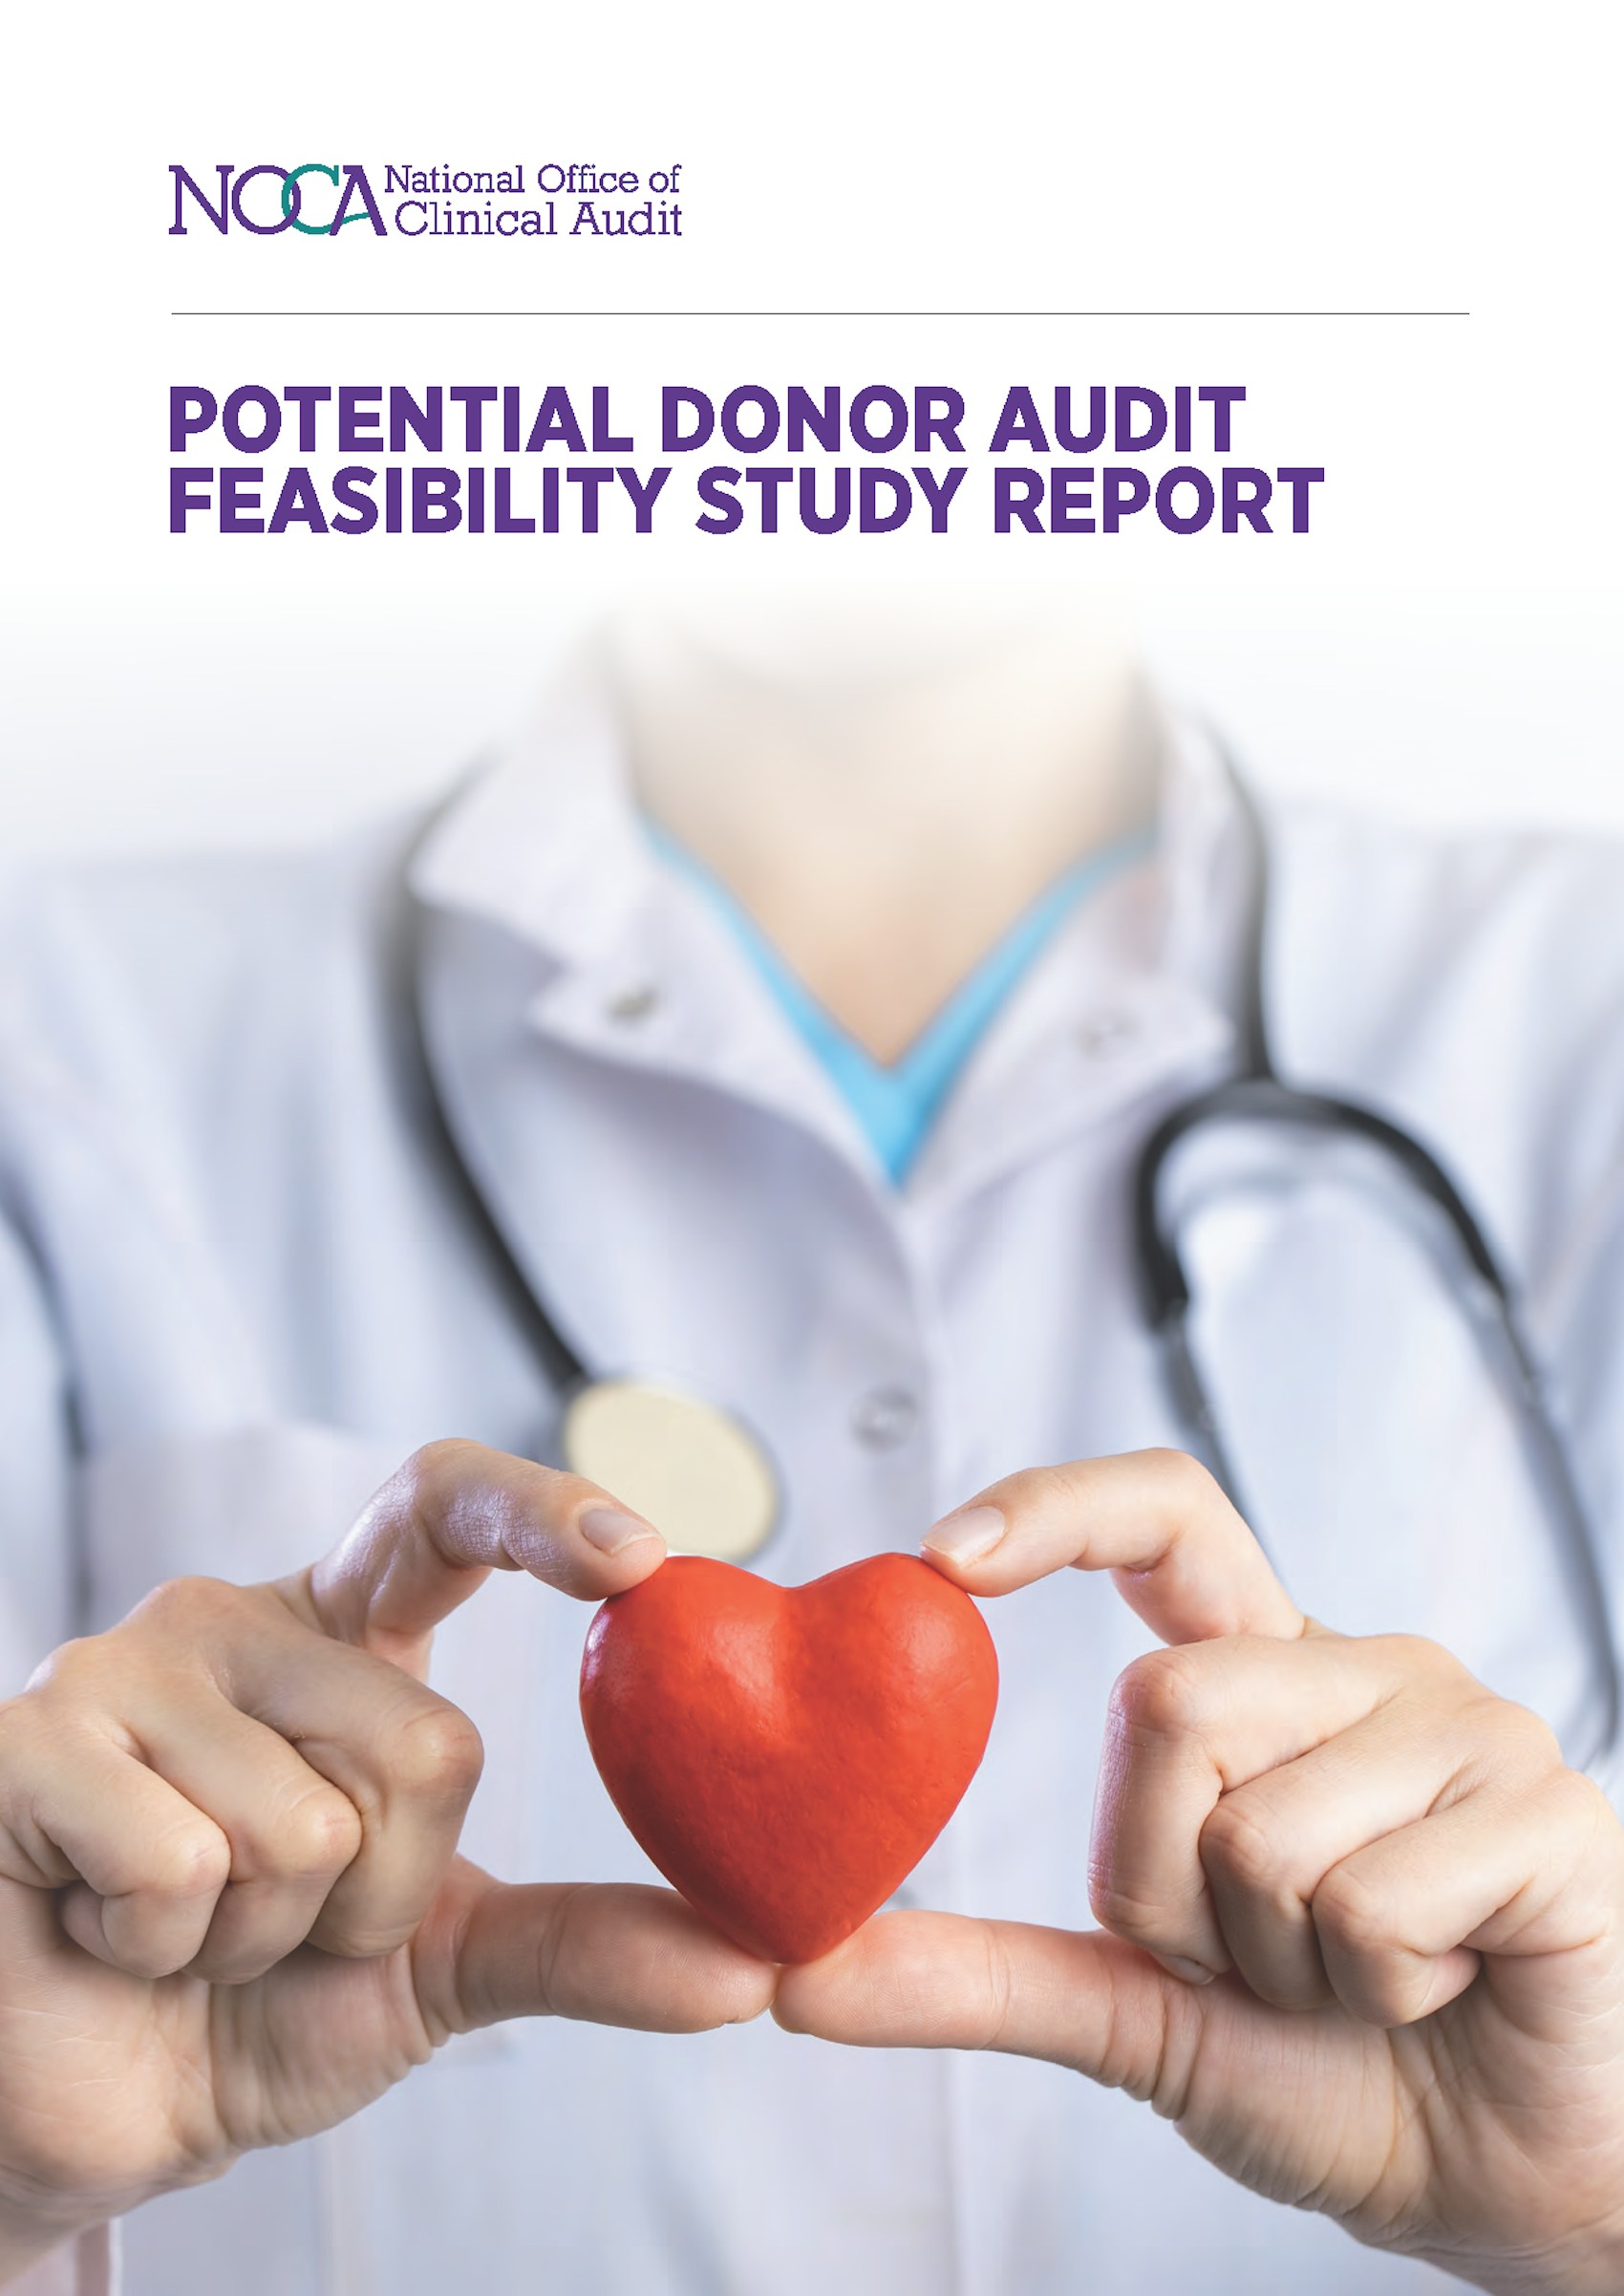 NOCA publishes Potential Donor Audit Feasibility Study